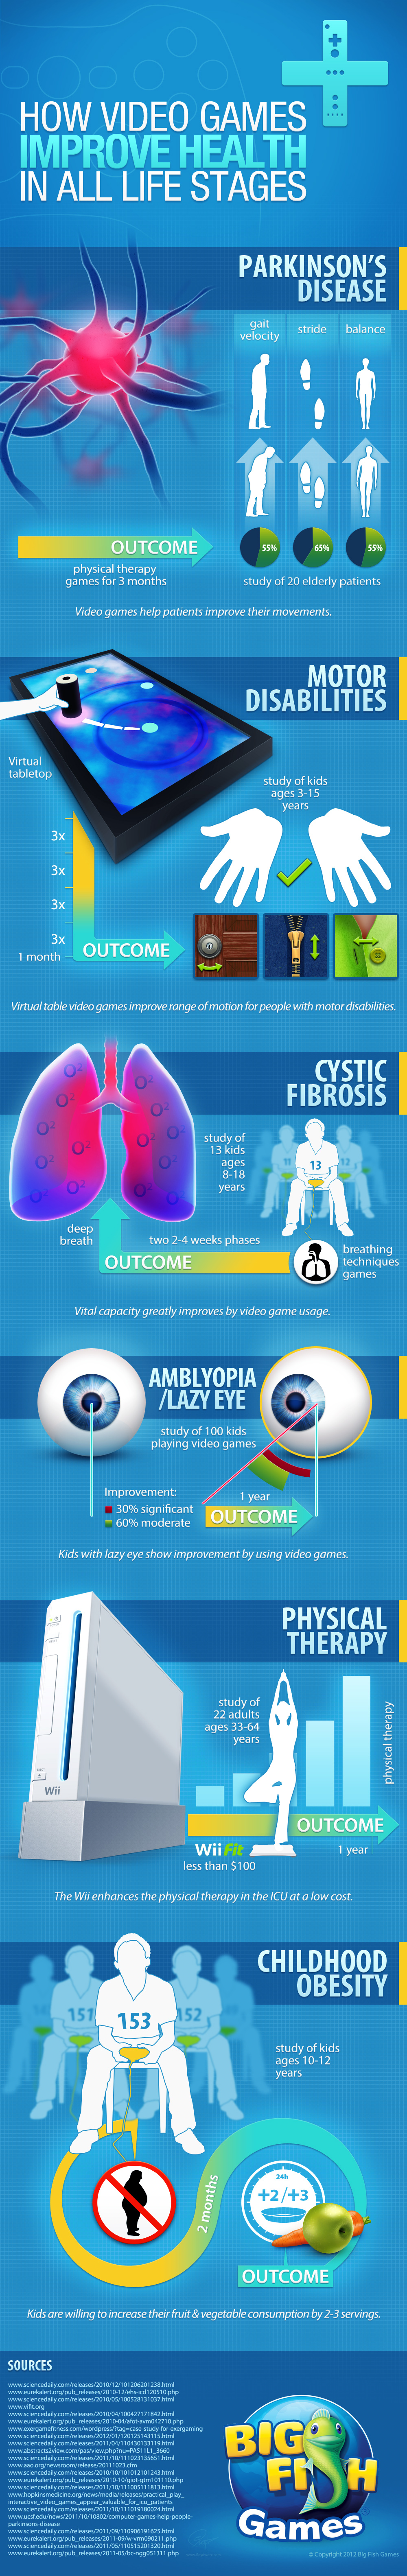 InfoGraphic on How Video Games Improve Health,